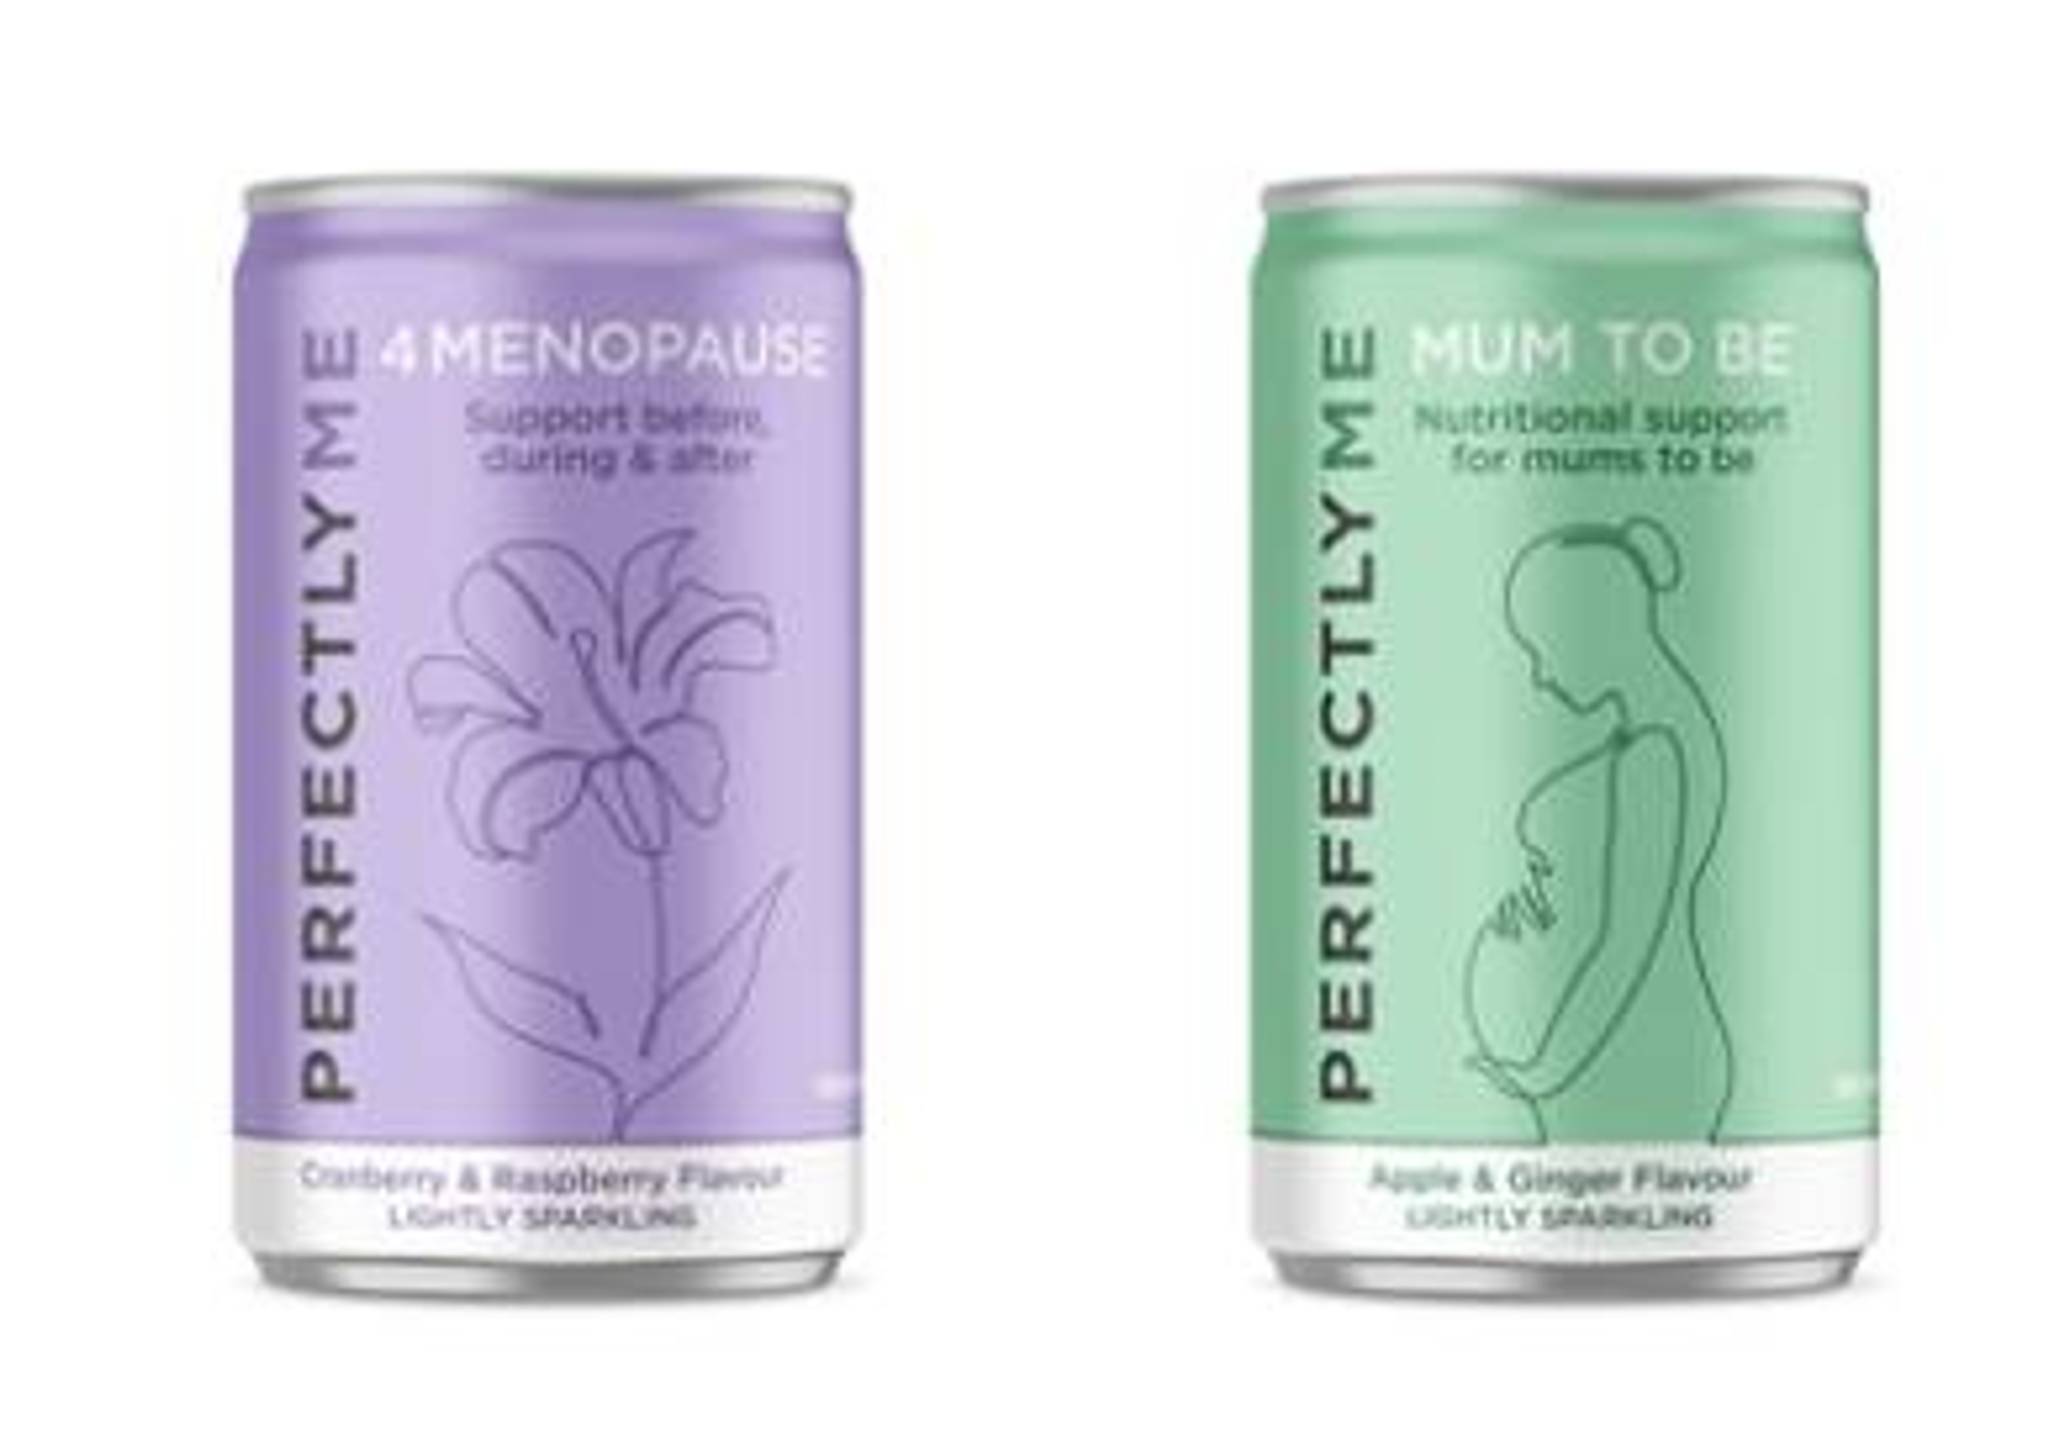 Clearly Drinks offers functional drinks for menopause